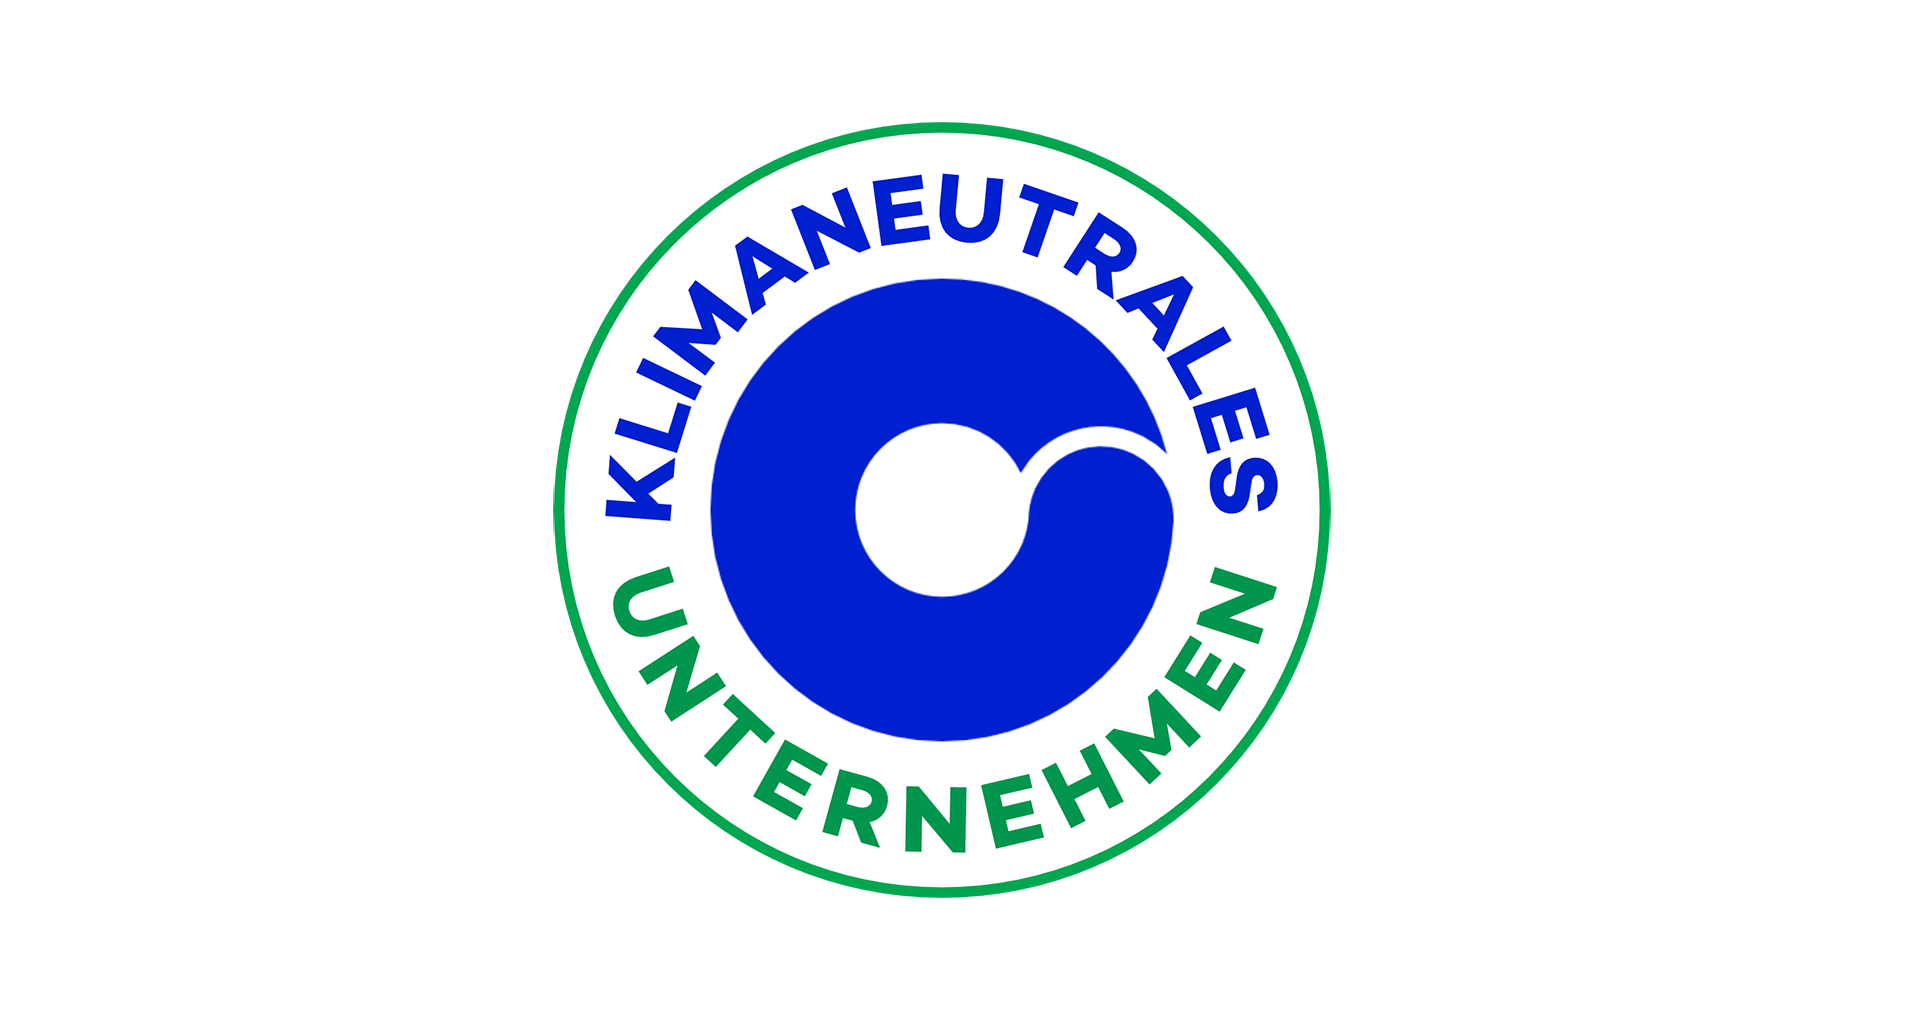 Climate neutral company seal